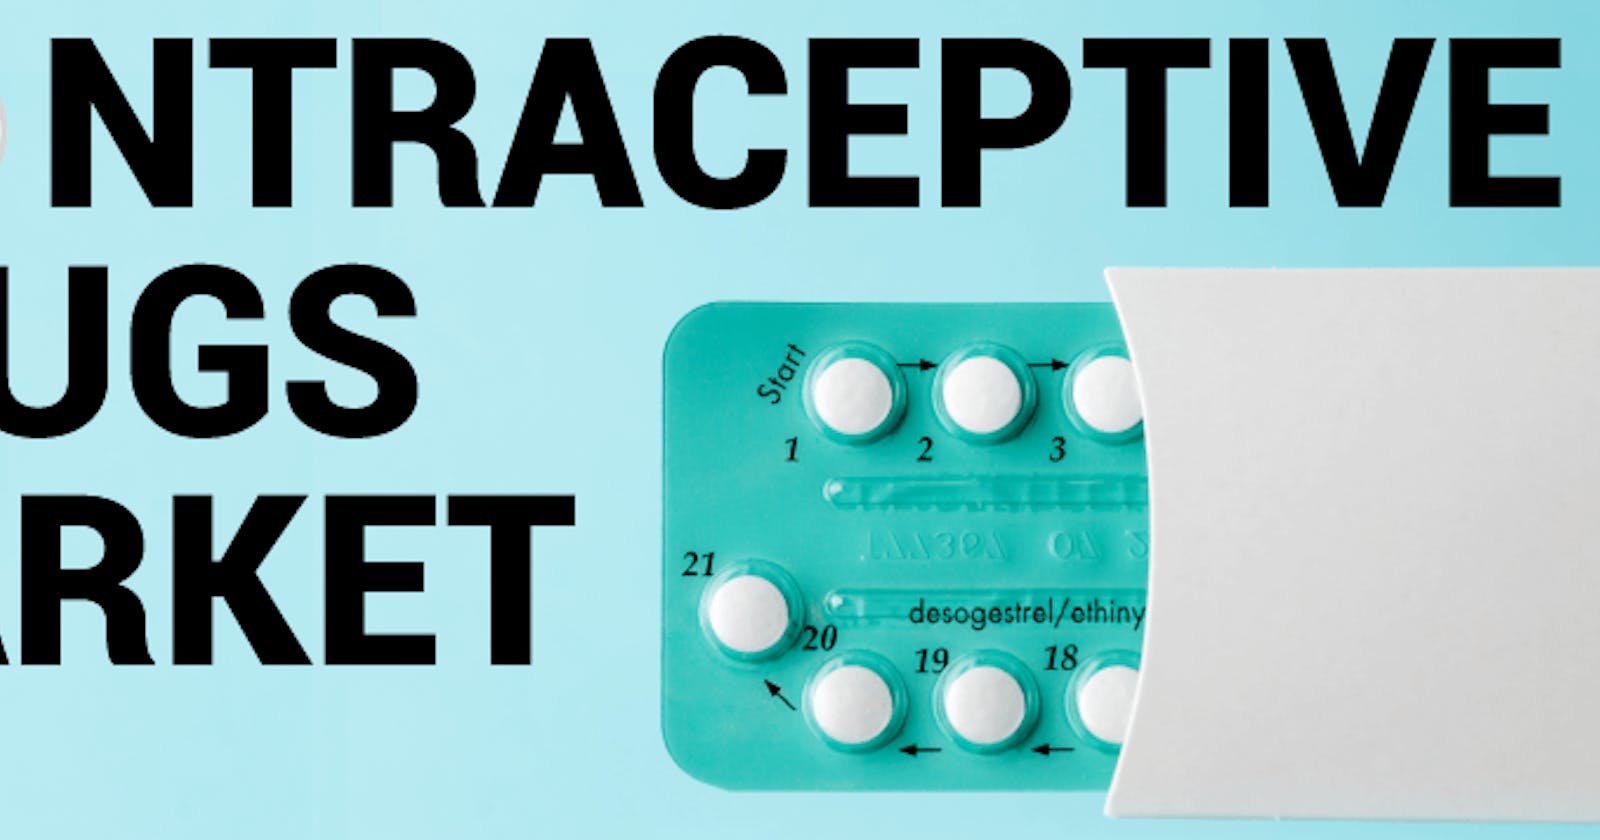 Contraceptive Drugs Market 2023: Trends, Drivers and Future Outlook